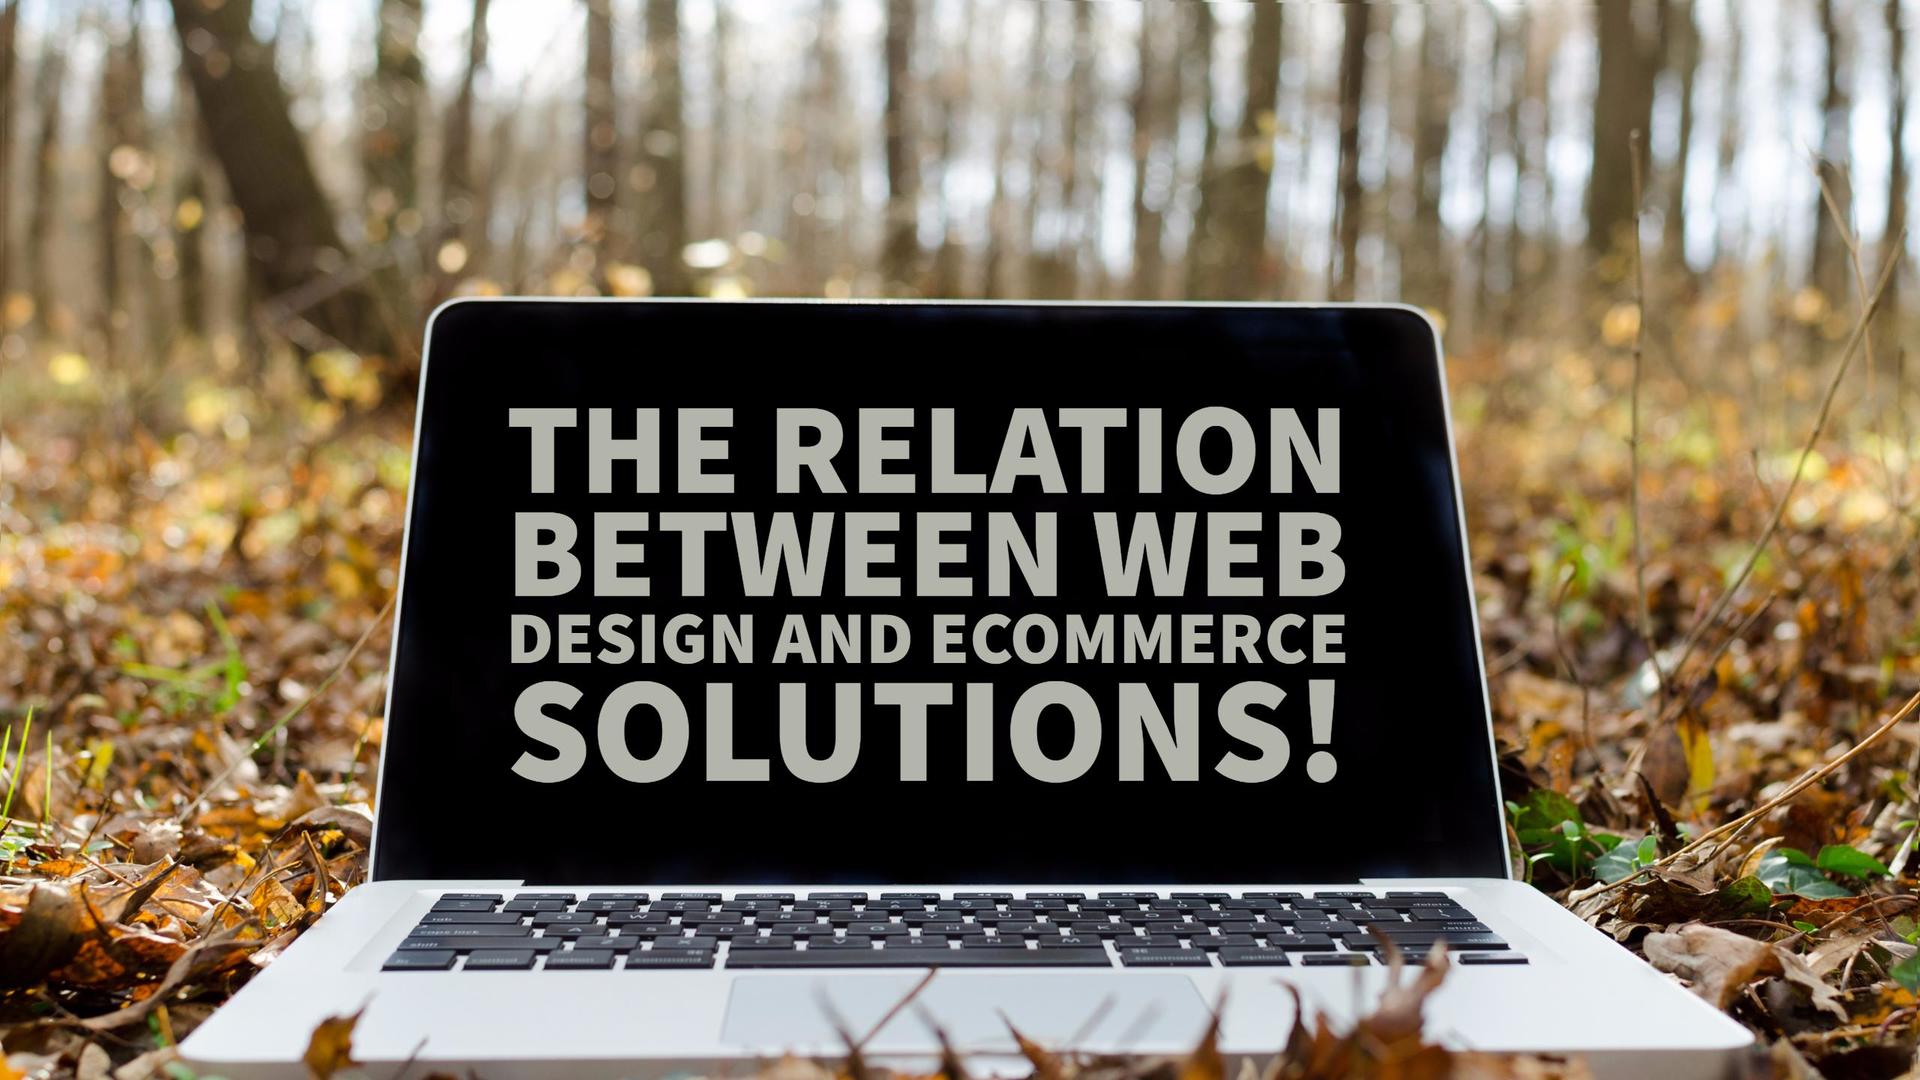 The Relation Between Web Design And Ecommerce Solutions - Web Designing Companies in Dubai